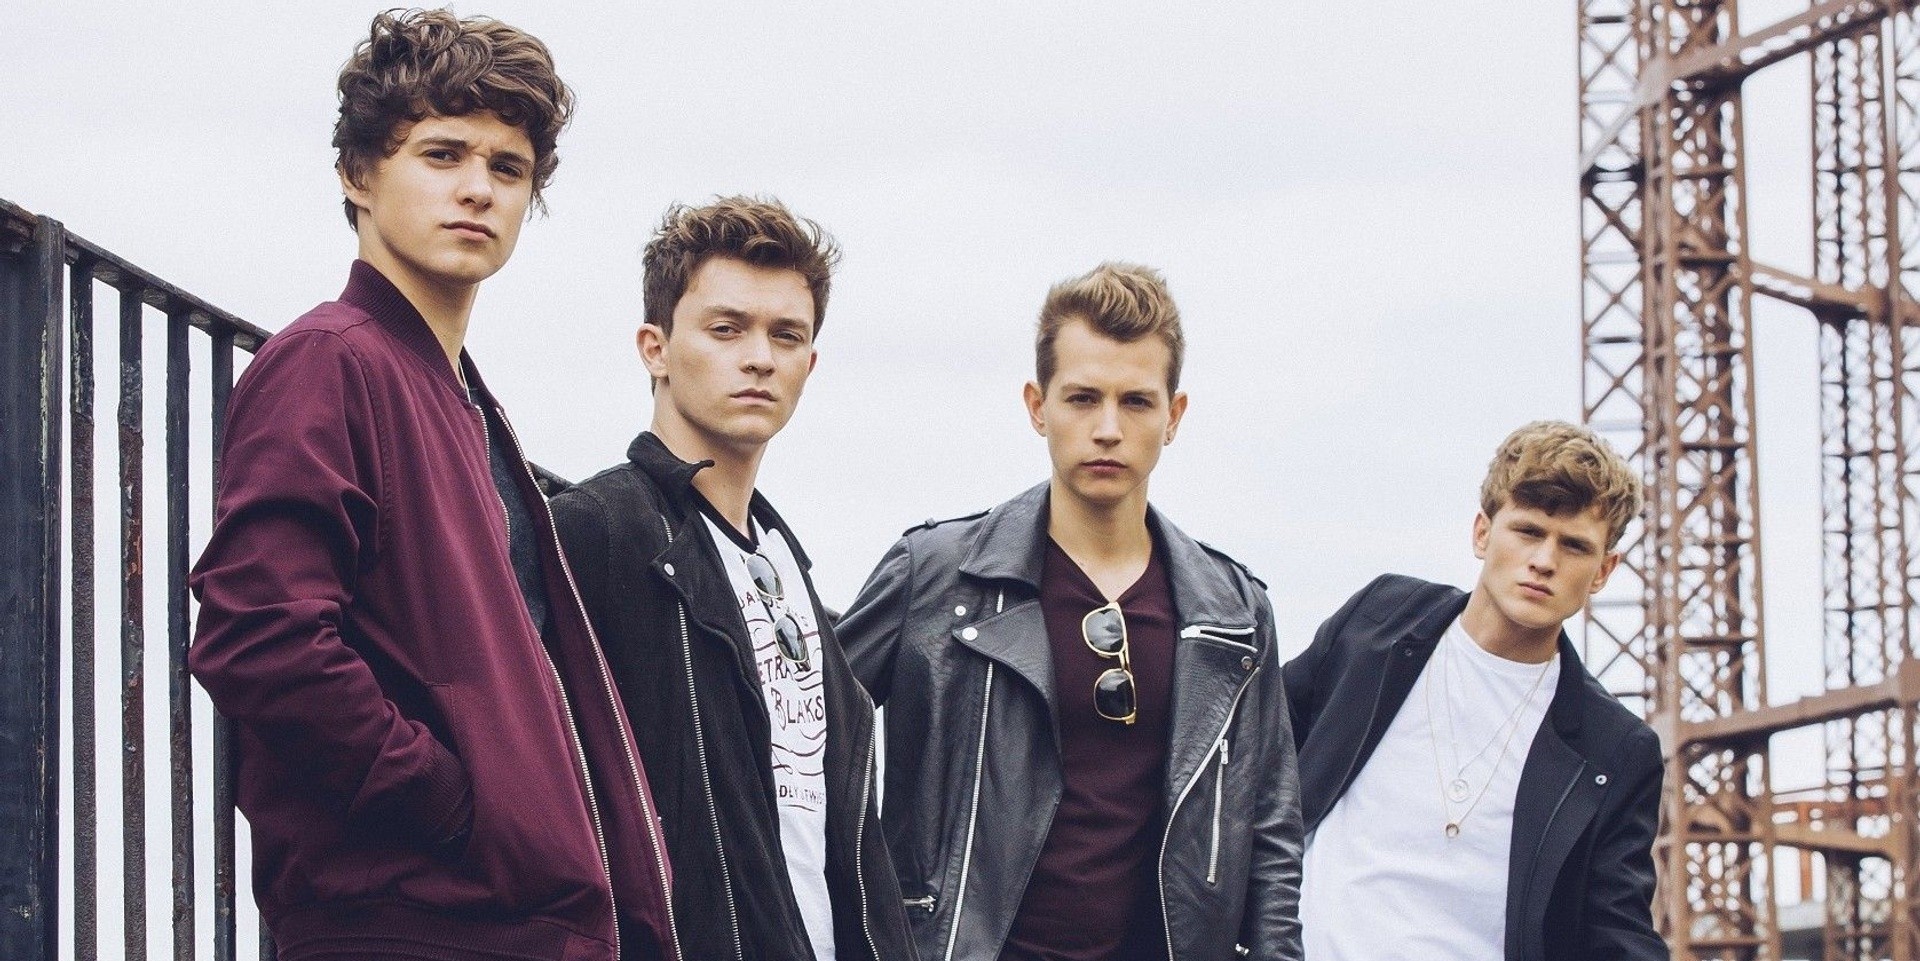 The Vamps return to Manila for an intimate acoustic show